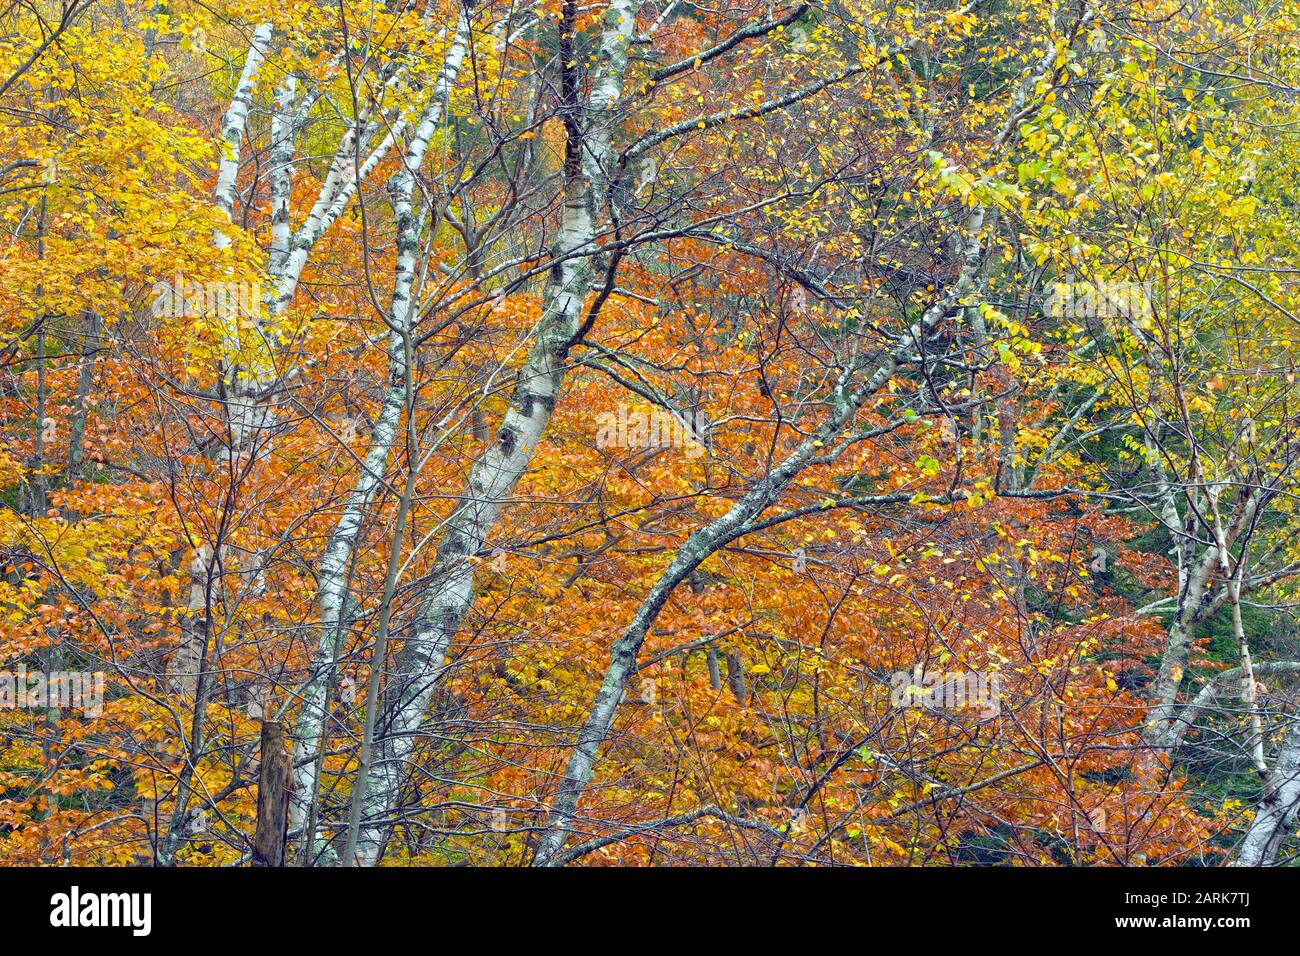 Beautiful red and orange and yellow fall foliage against a stand of white birch trees in Vermont green mountain national forest Stock Photo